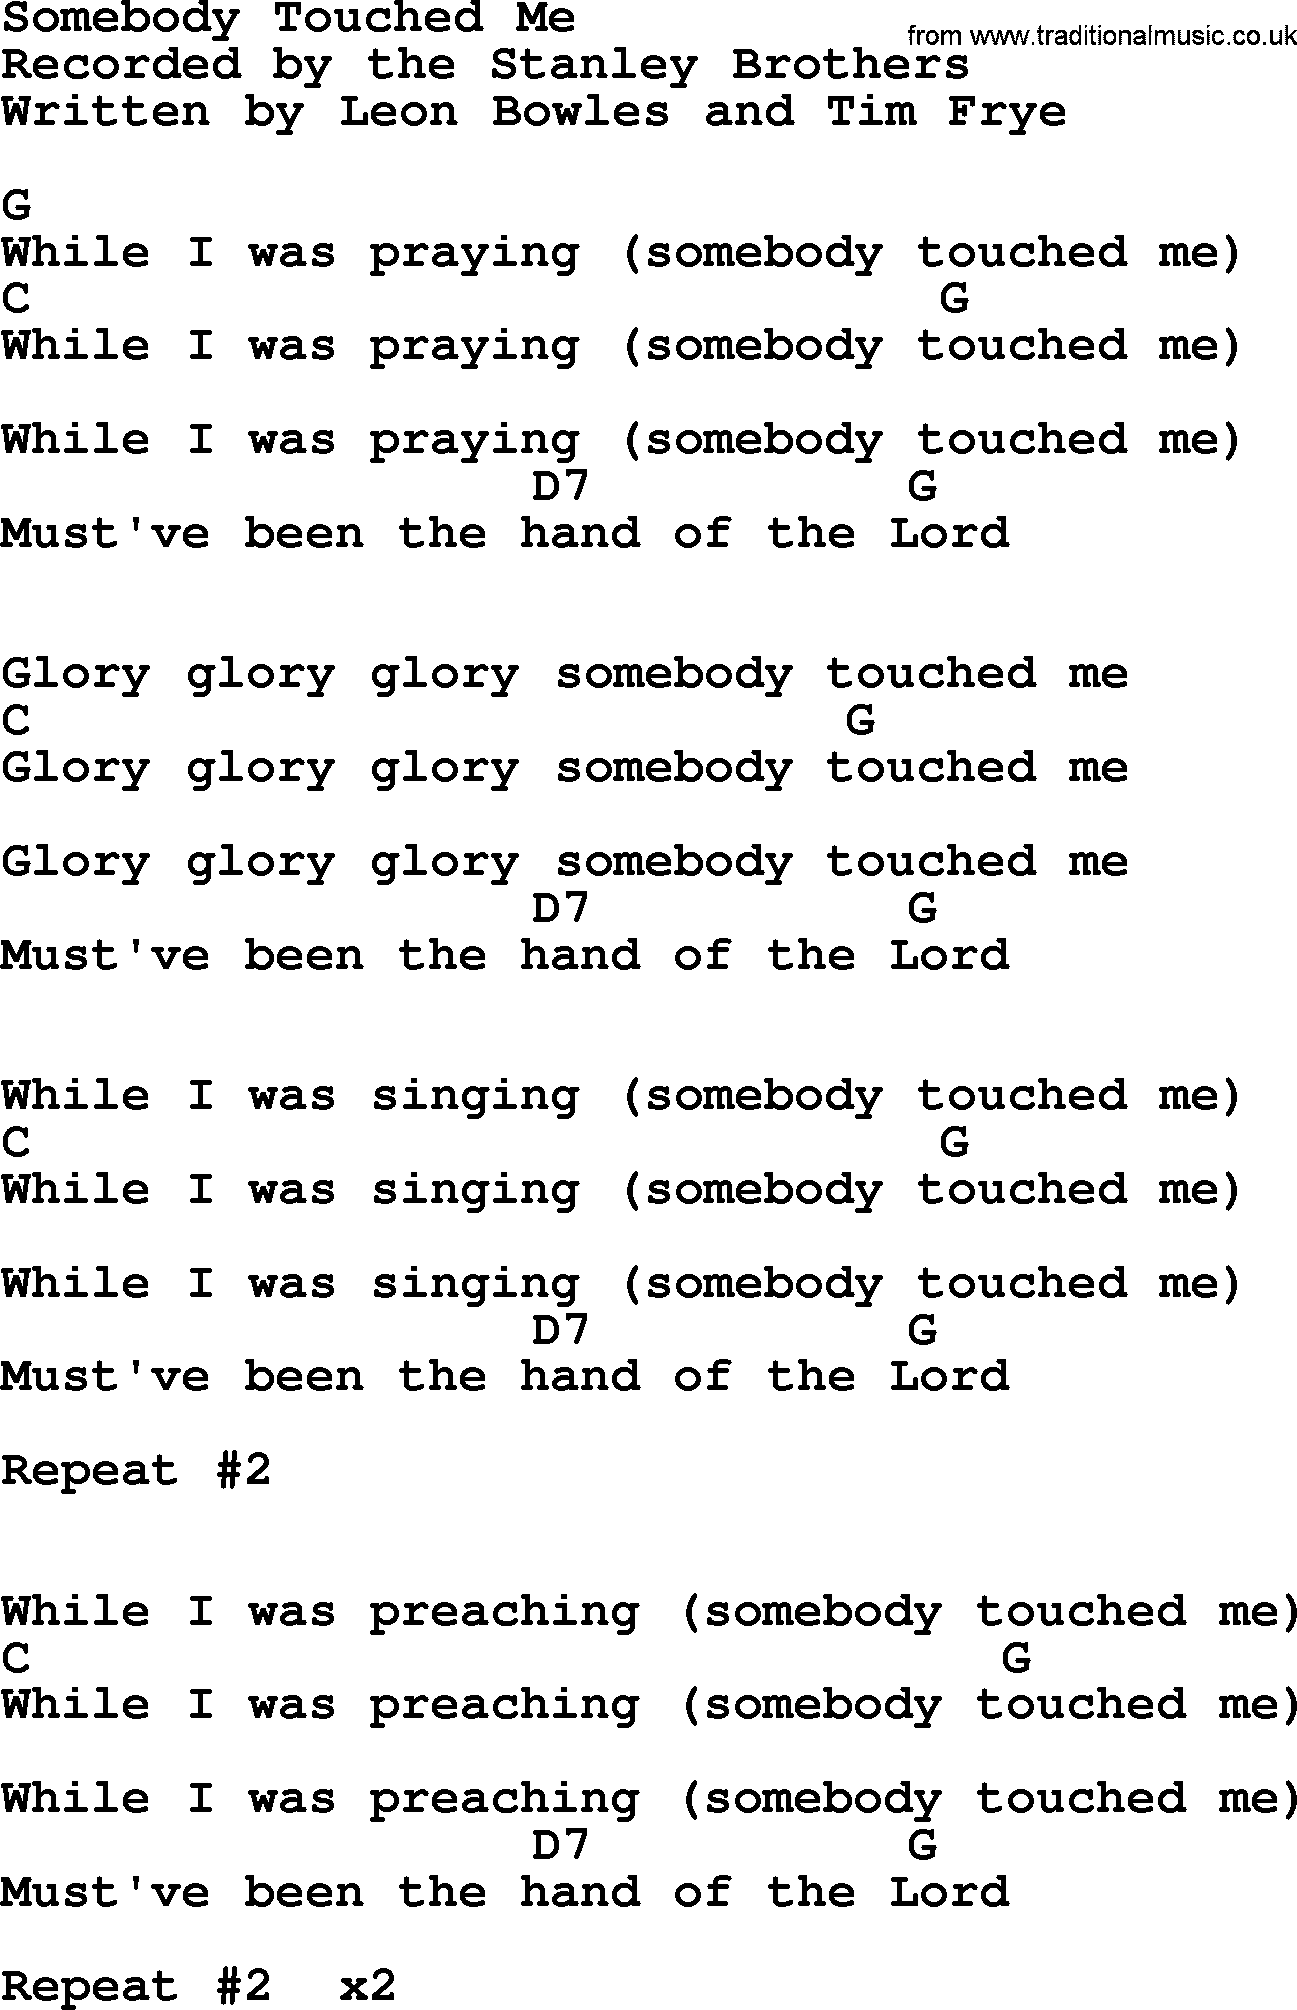 Bluegrass song: Somebody Touched Me, lyrics and chords